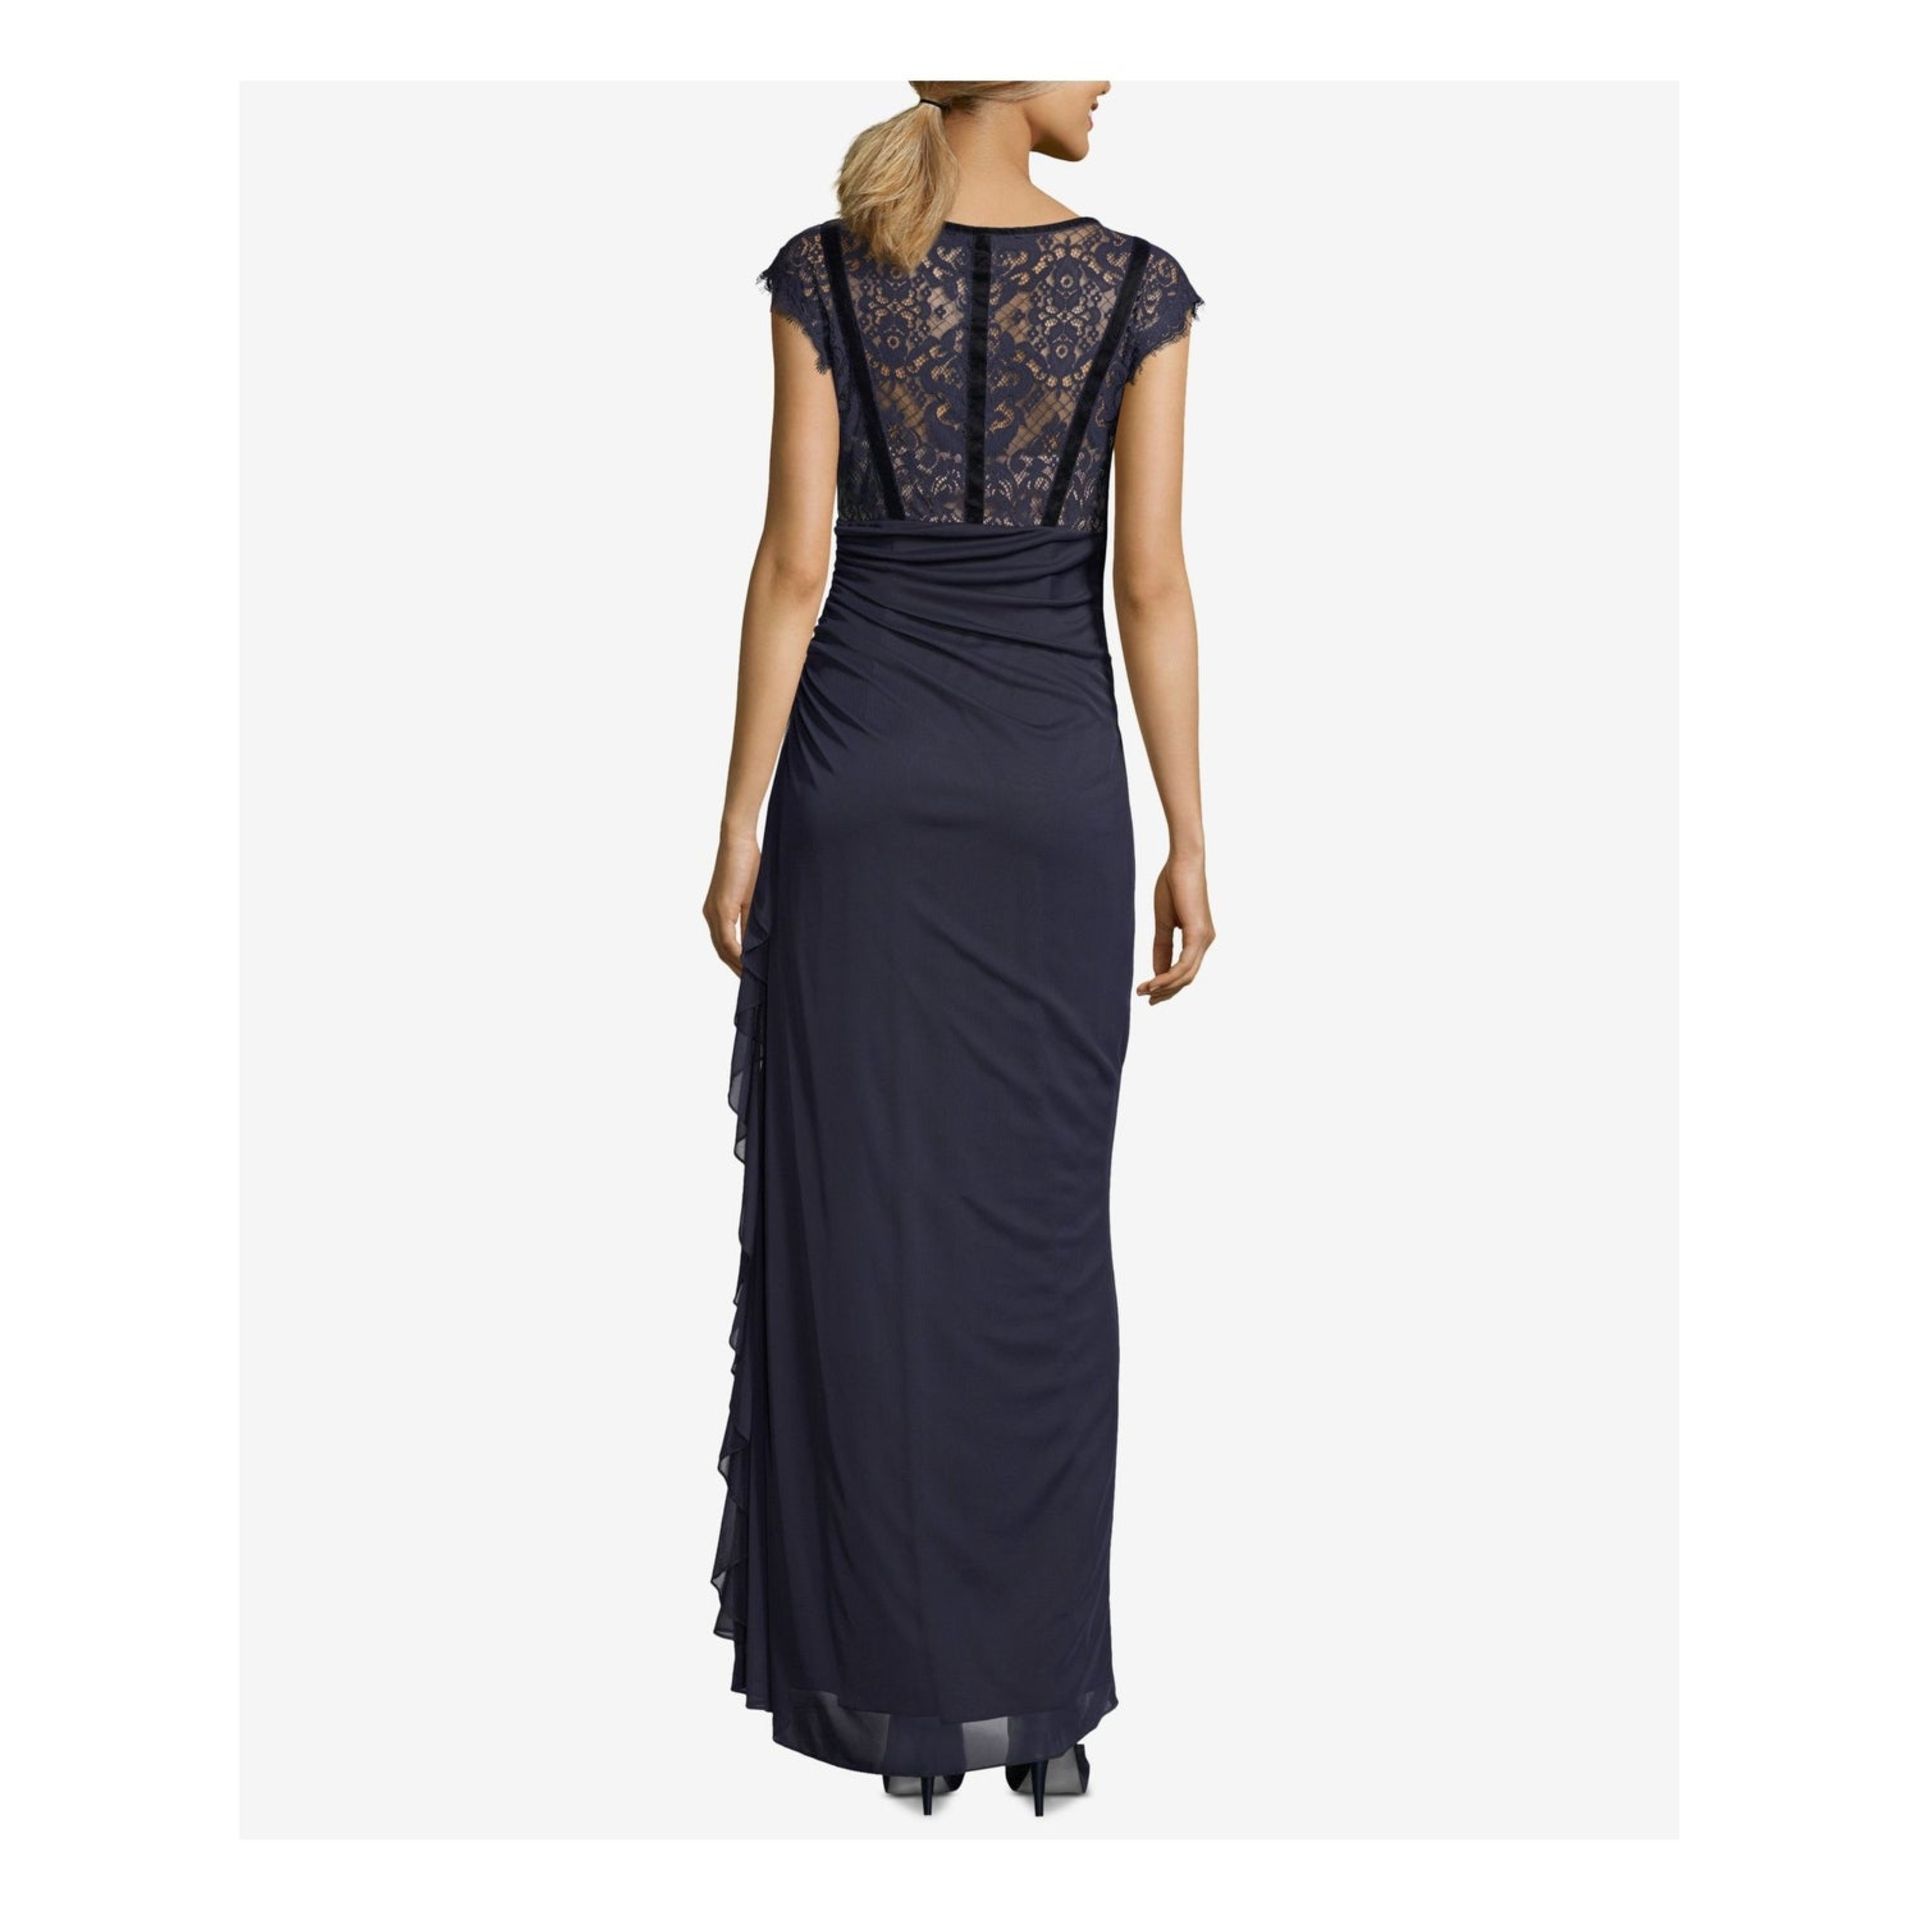 Betsy & Adam Womens Navy Ruched Lace Bodice Gown Cap Sleeve Jewel Neck Full-Length Evening Dress Uk - Image 2 of 2